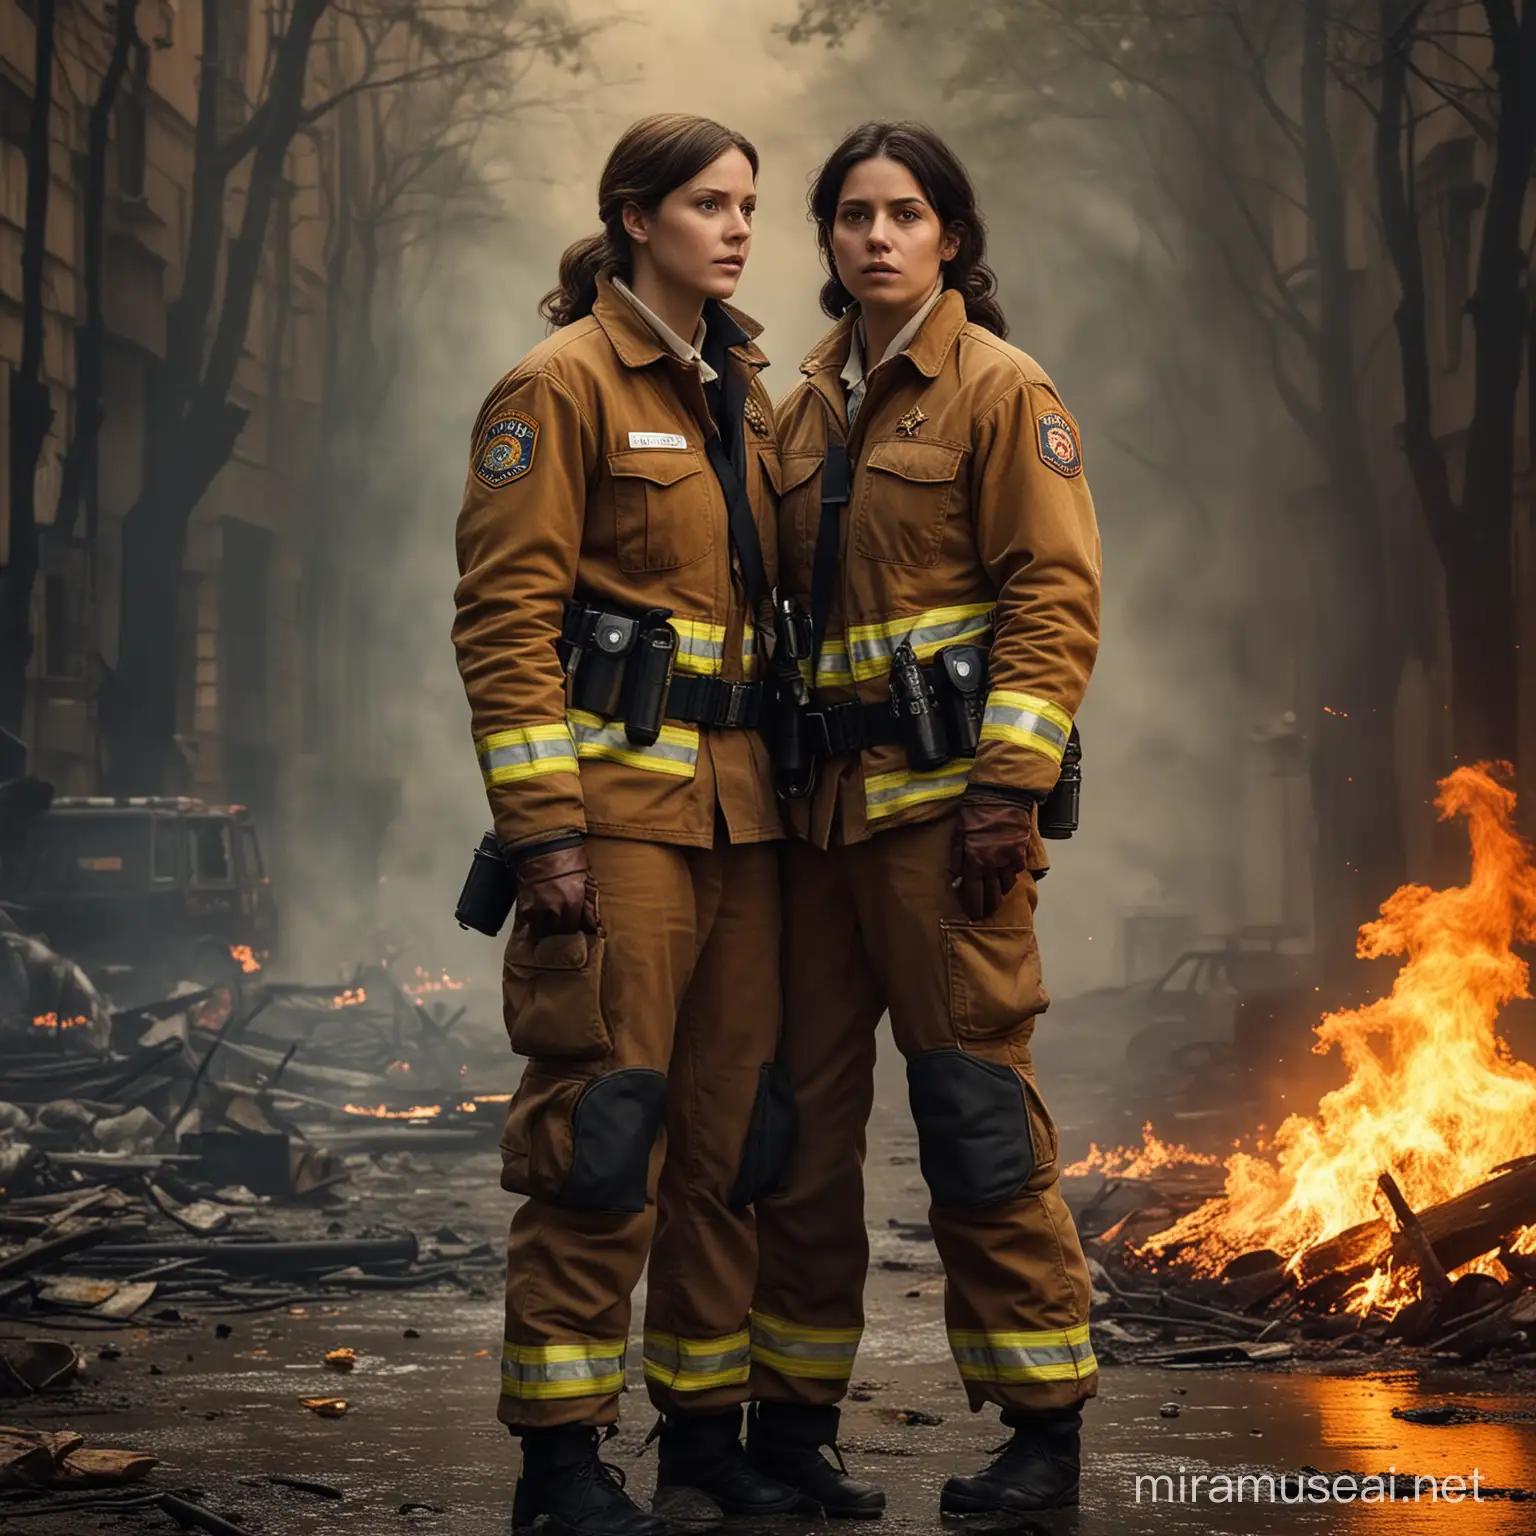 Lesbian Detective Captain Investigating Fire Department Arsonist Mystery